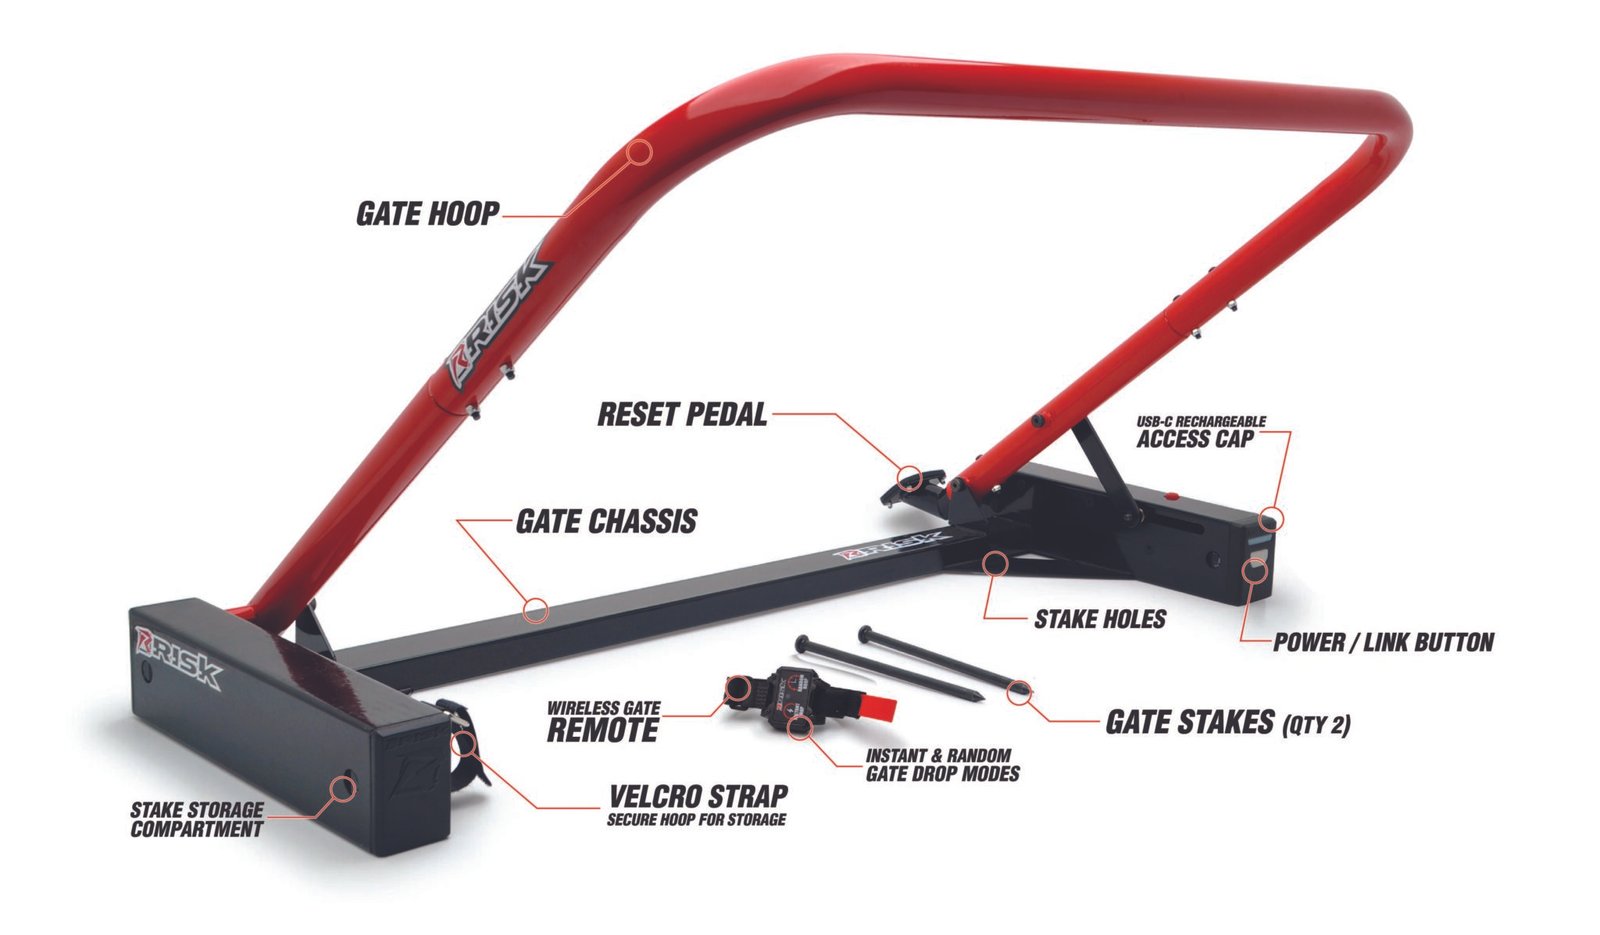 PRO Holeshot Starting Gate DIAGRAM with callouts describing the features